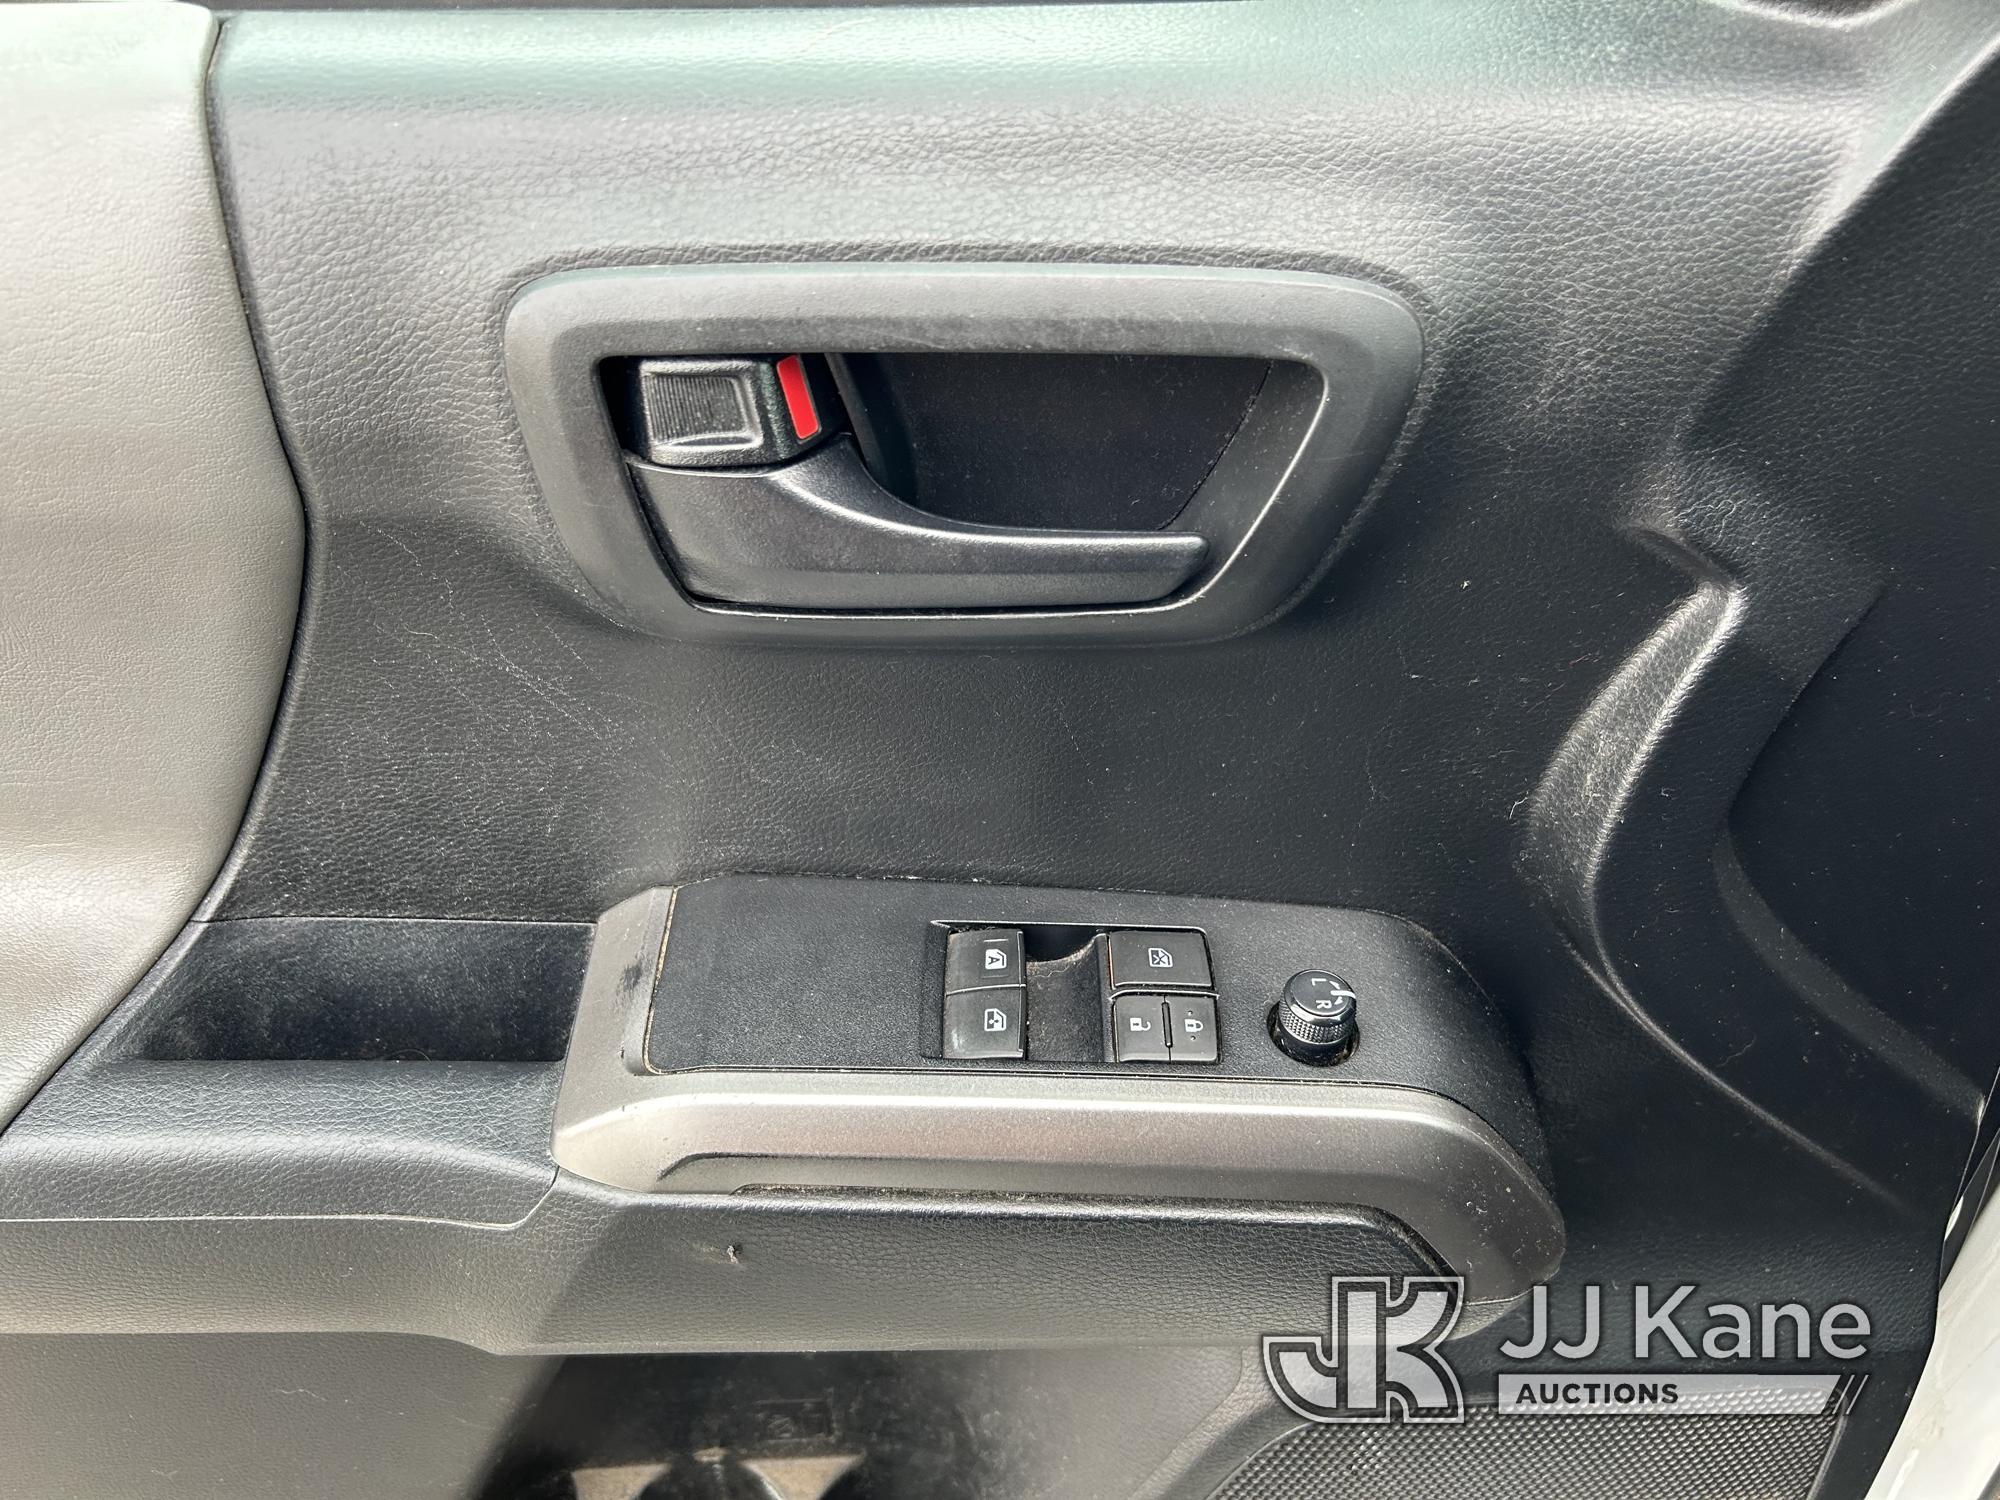 (Hagerstown, MD) 2019 Toyota Tacoma Extended-Cab Pickup Truck Runs & Moves, Front Damage, Rust & Bod